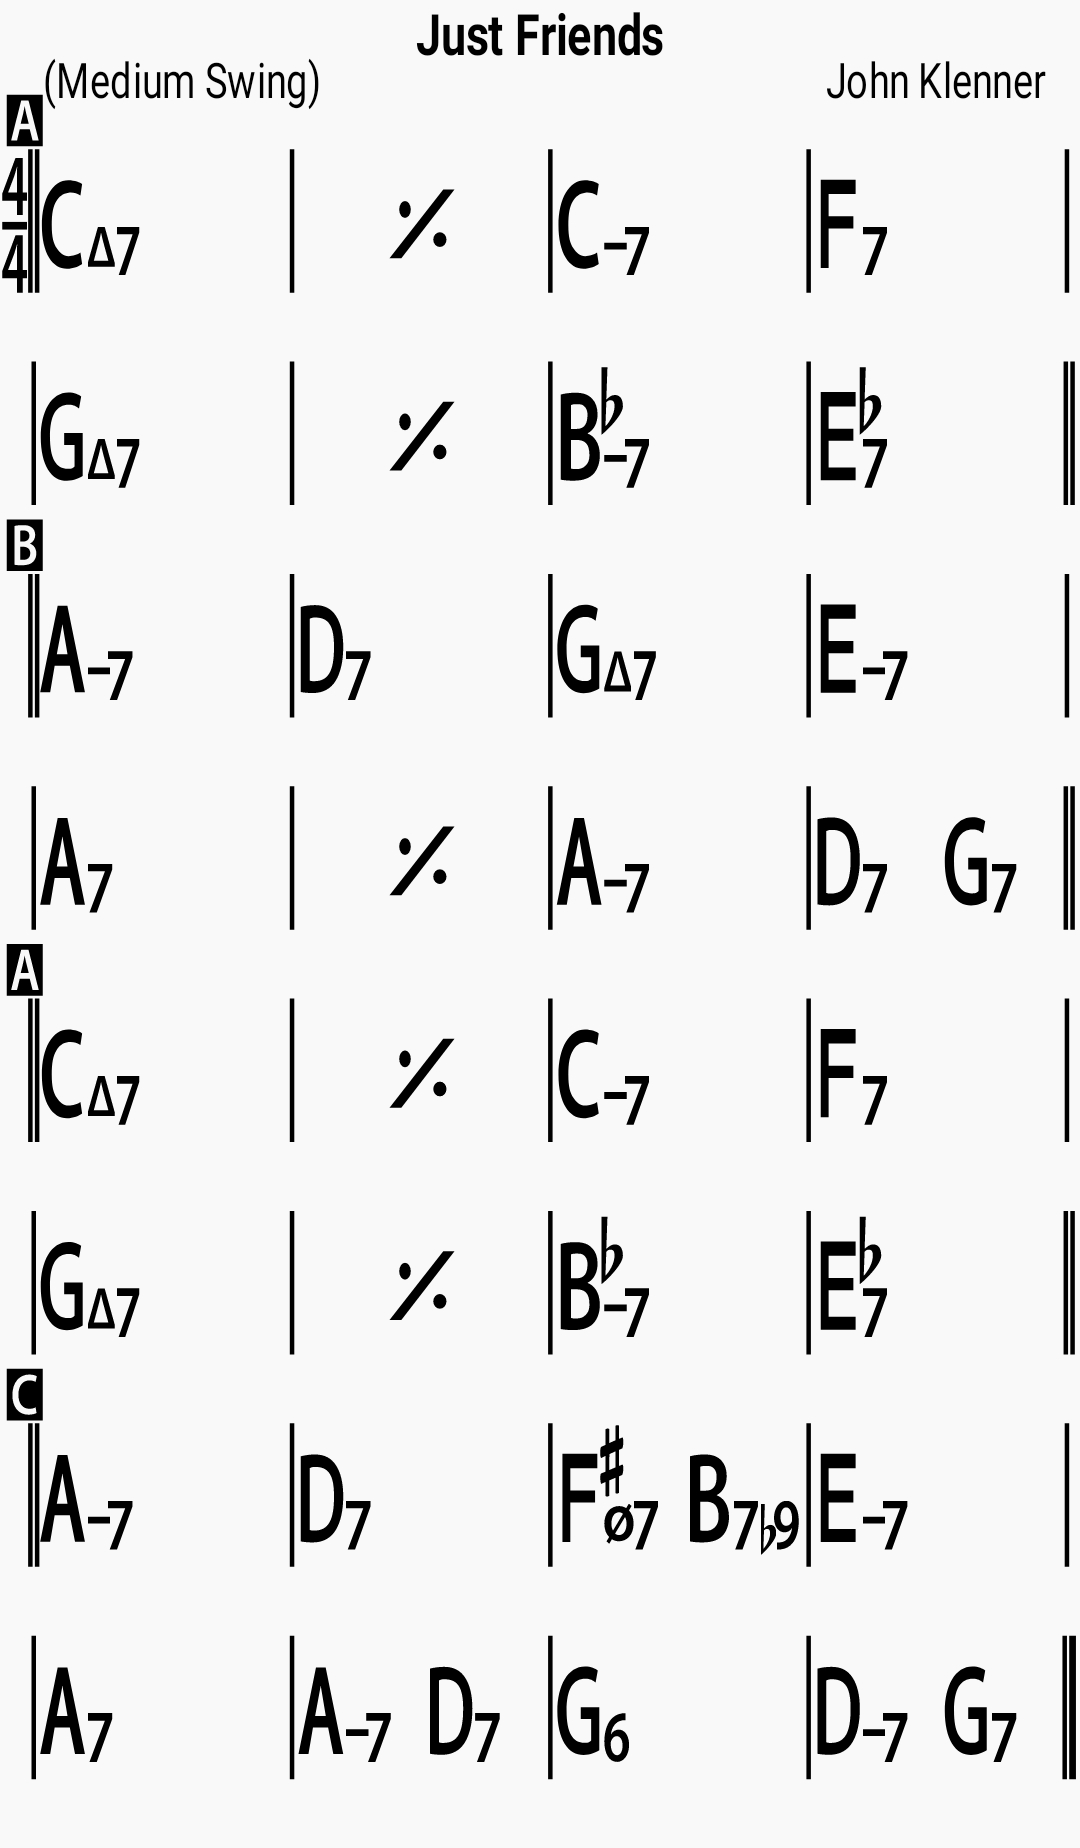 Chord chart for the jazz standard Just Friends